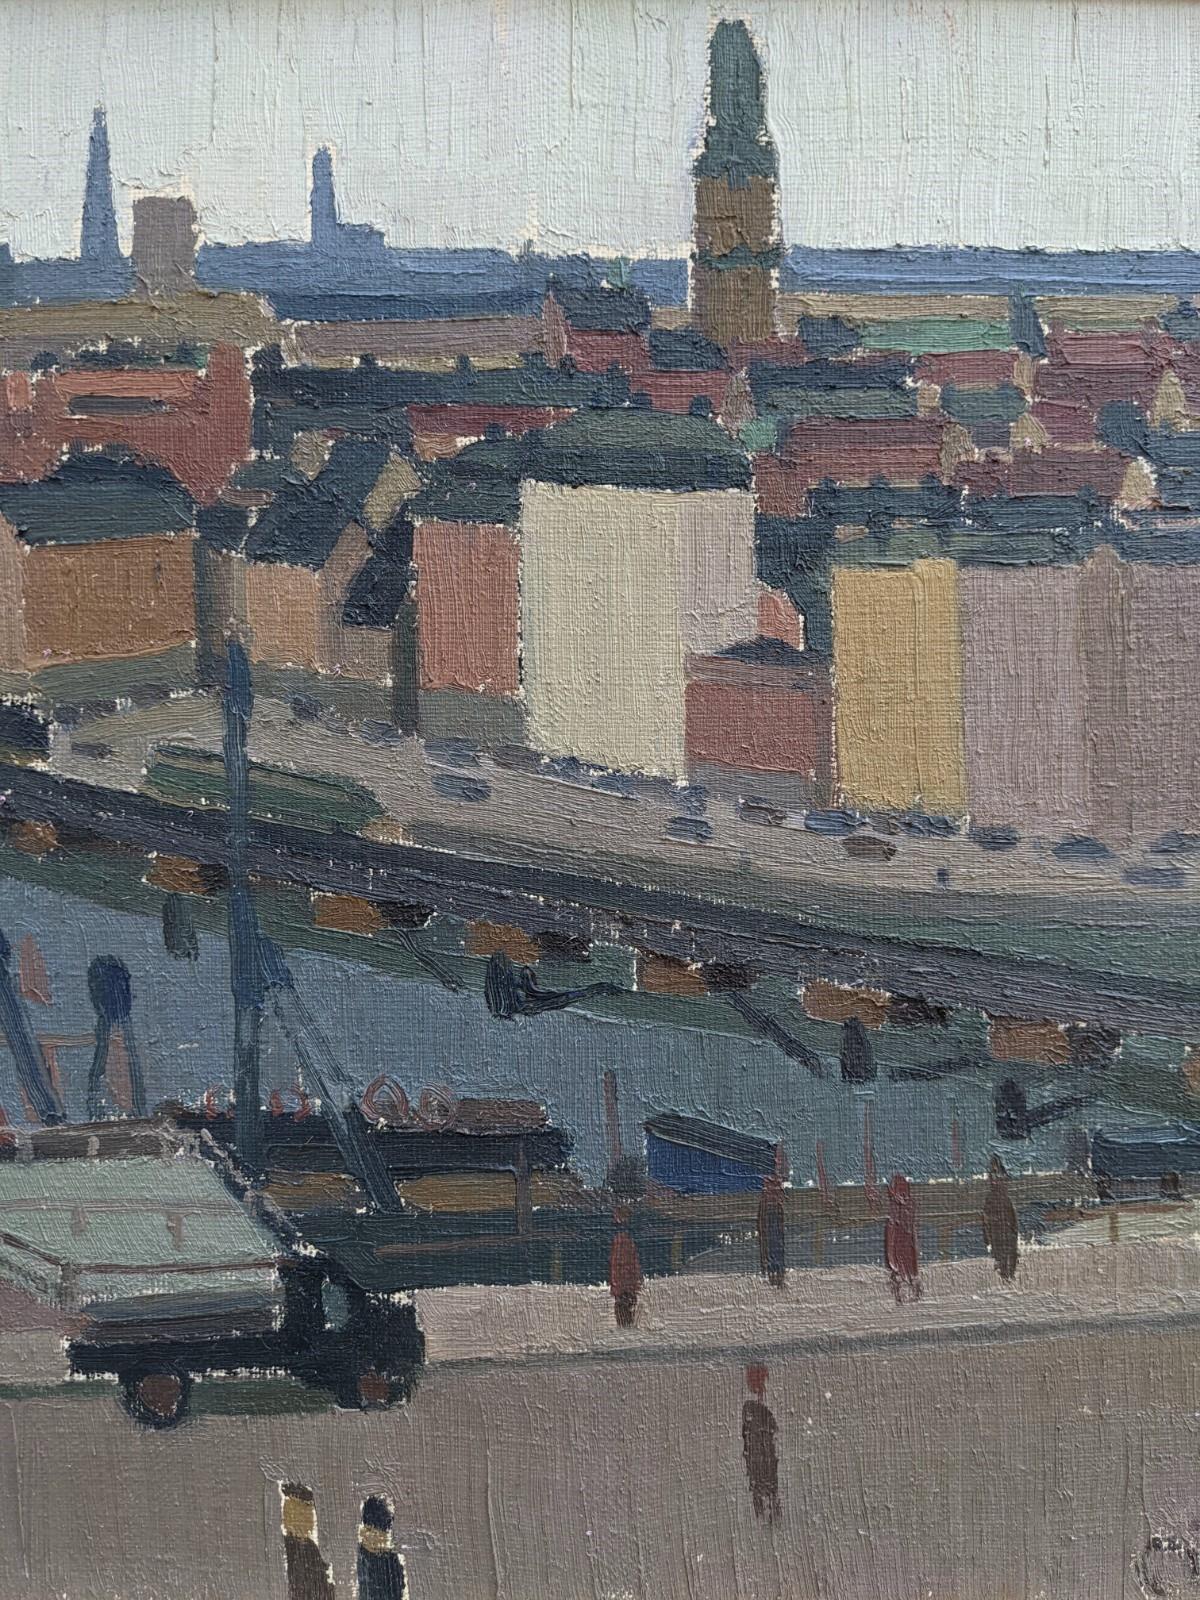 City View
Size: 48 x 72 cm (including frame)
Oil on canvas

A skilfully executed mid century modernist style cityscape composition of Stockholm in Sweden, executed in oil onto canvas.

The painting is a visual feast to the eyes and filled with